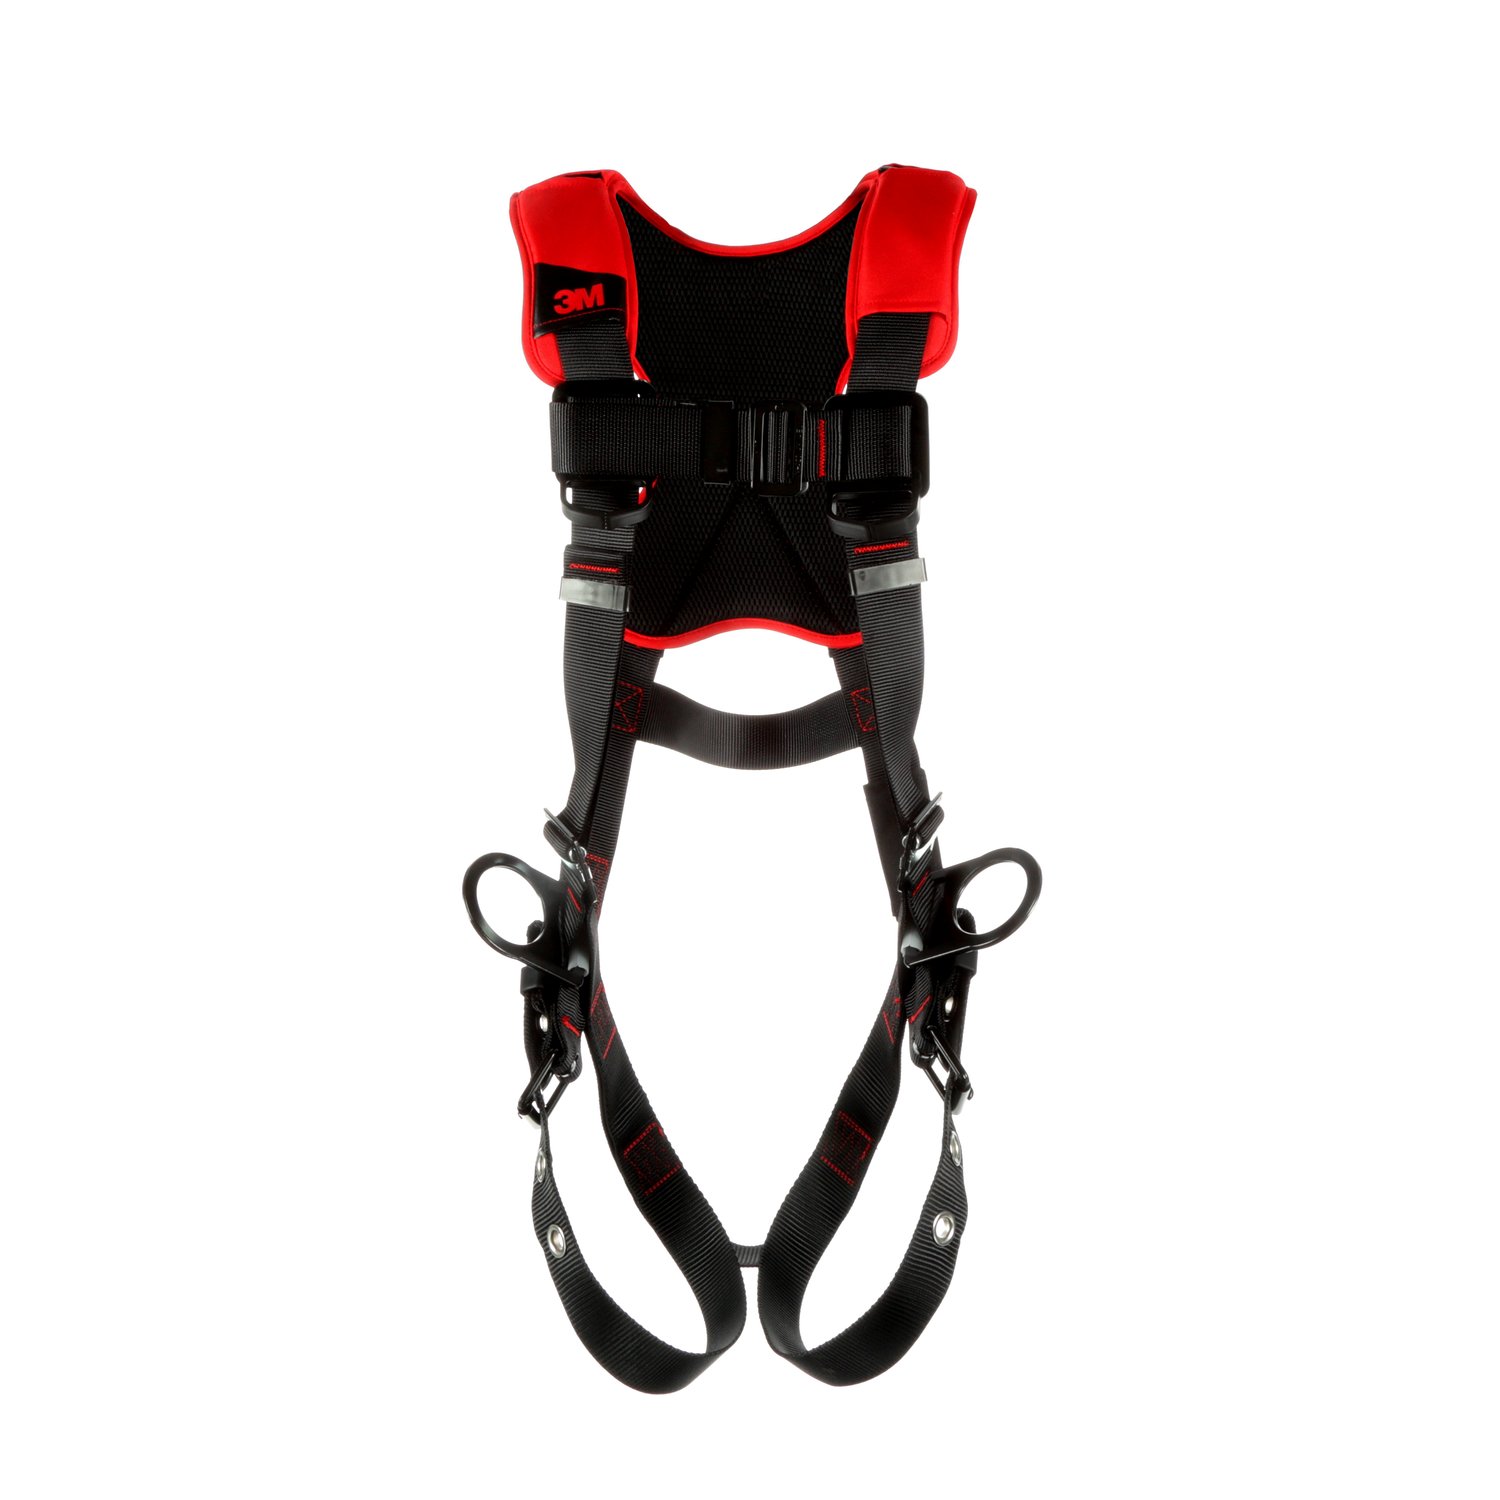 7012816684 - 3M Protecta P200 Comfort Vest Positioning Safety Harness 1161415, X-Large